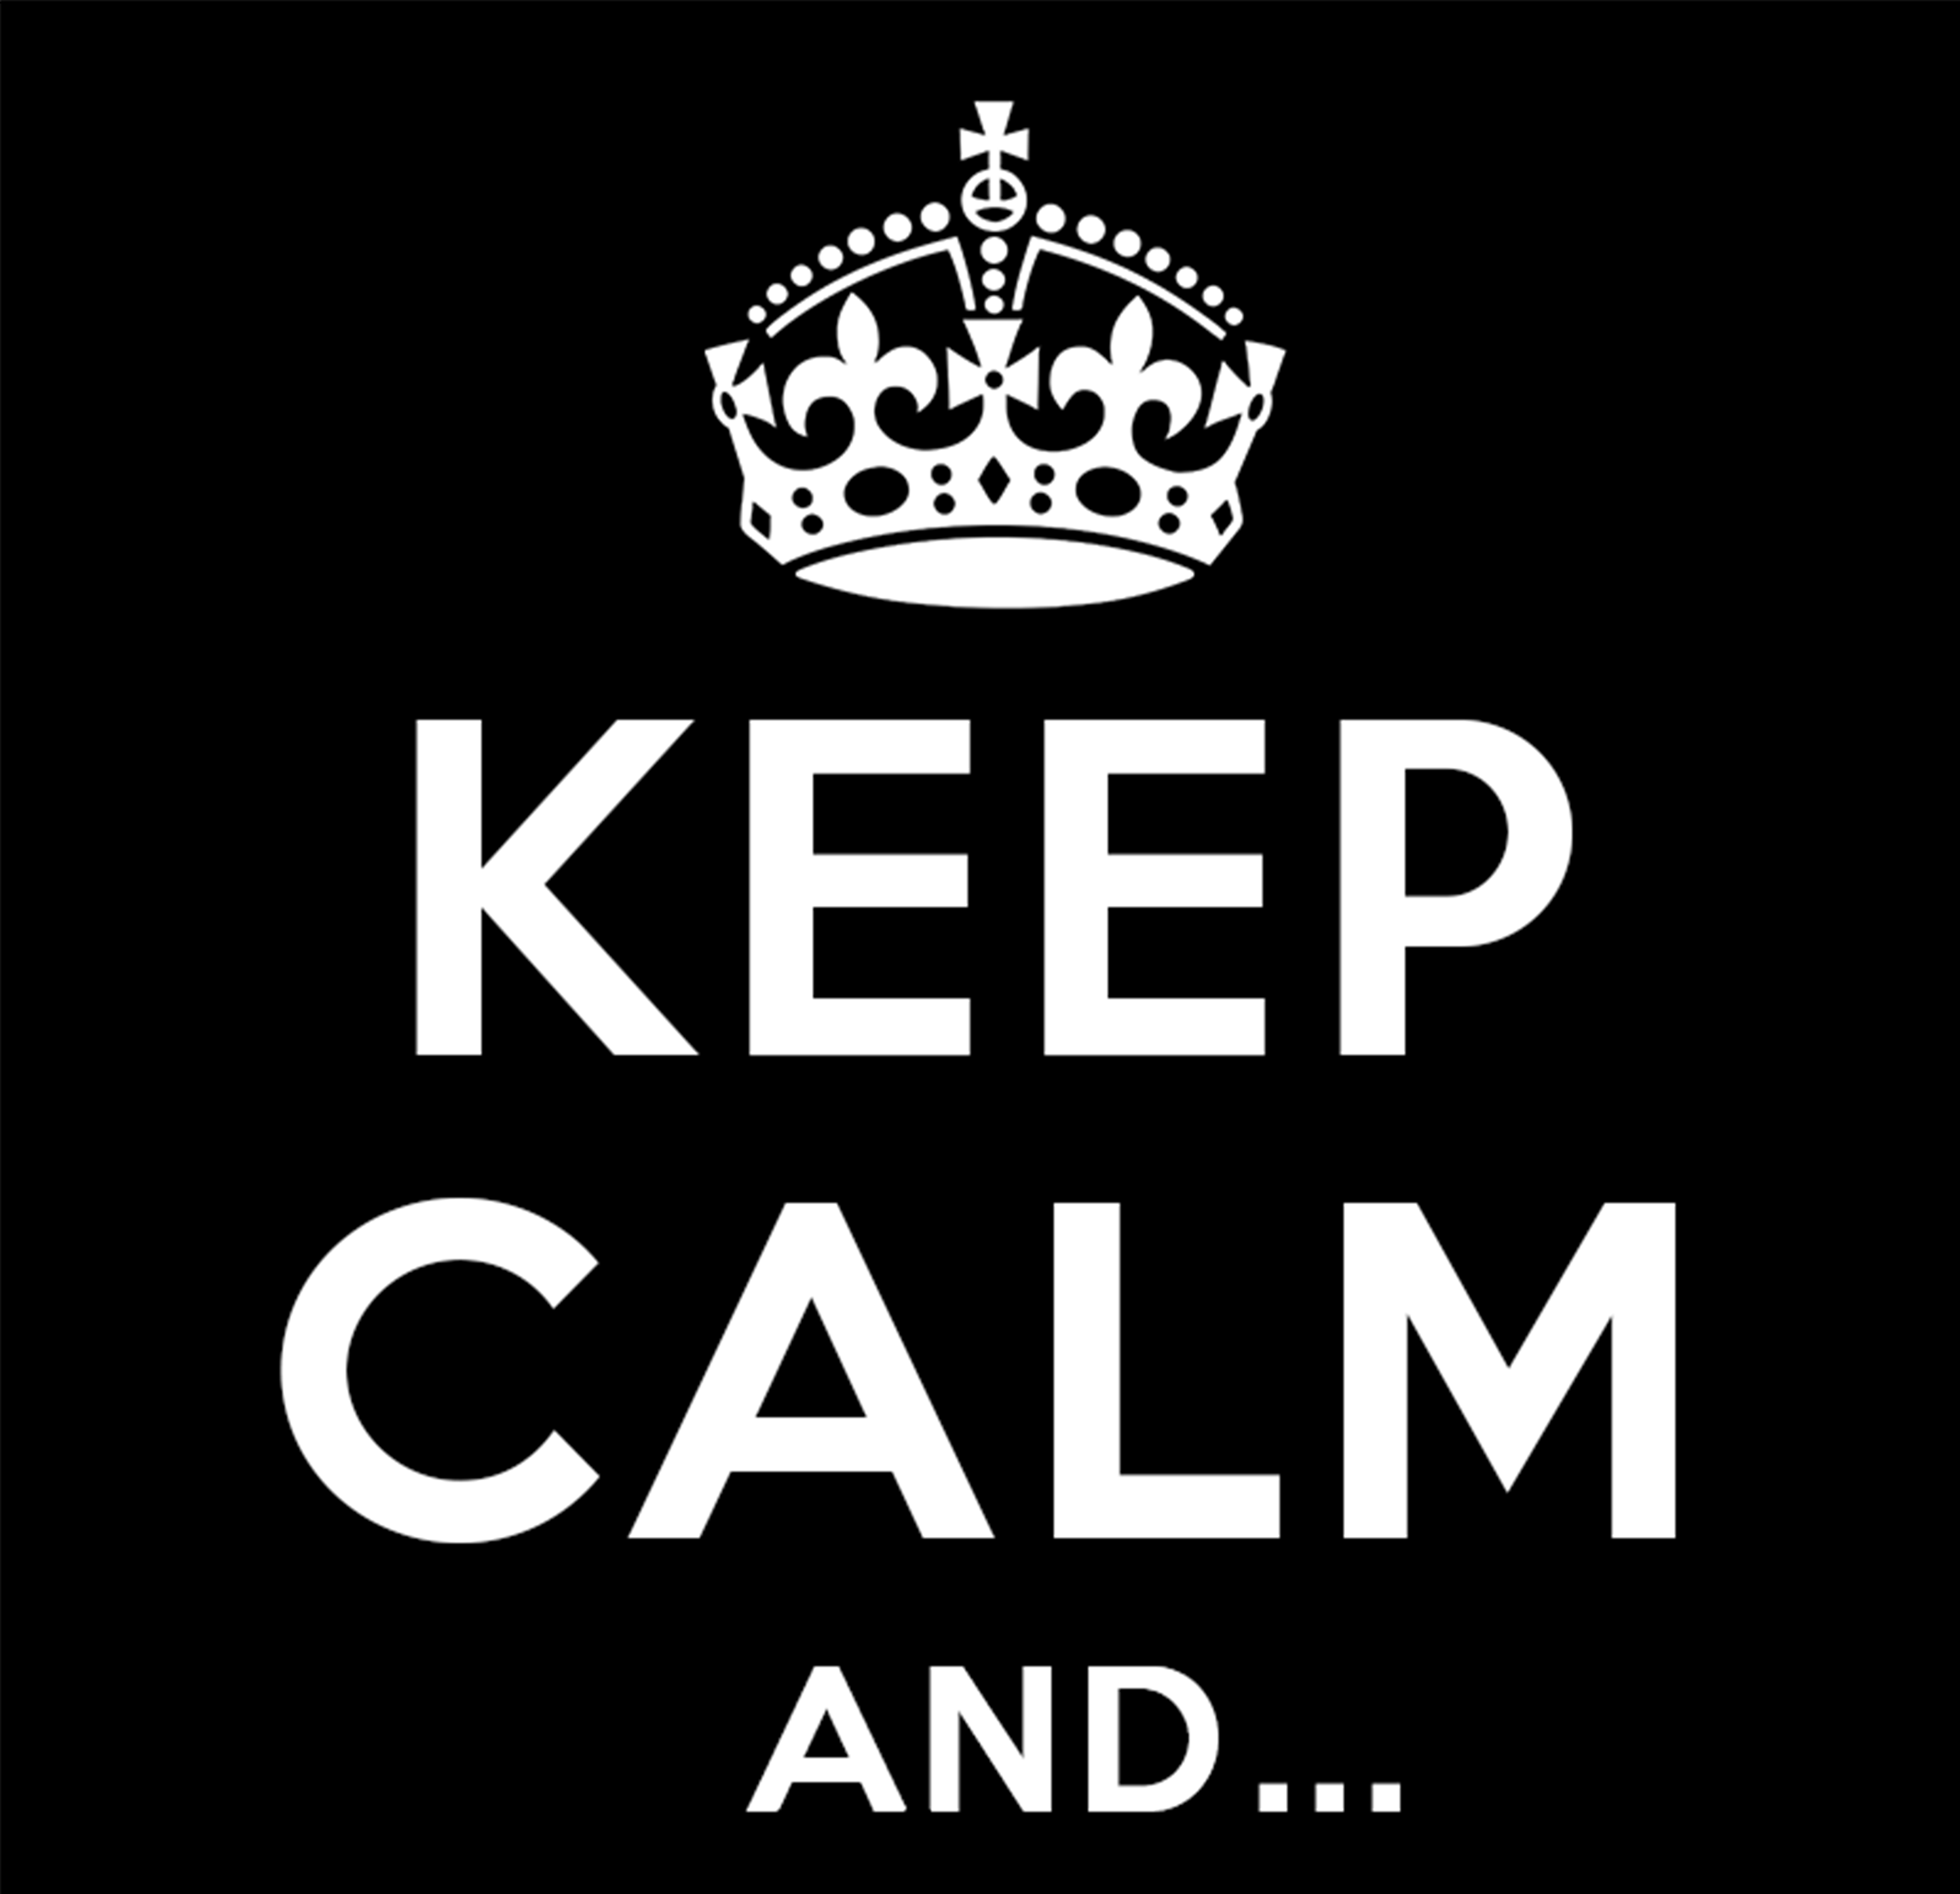 keep_calm_and_____by_chengwesley-d6do3k8-e1414868369714.png